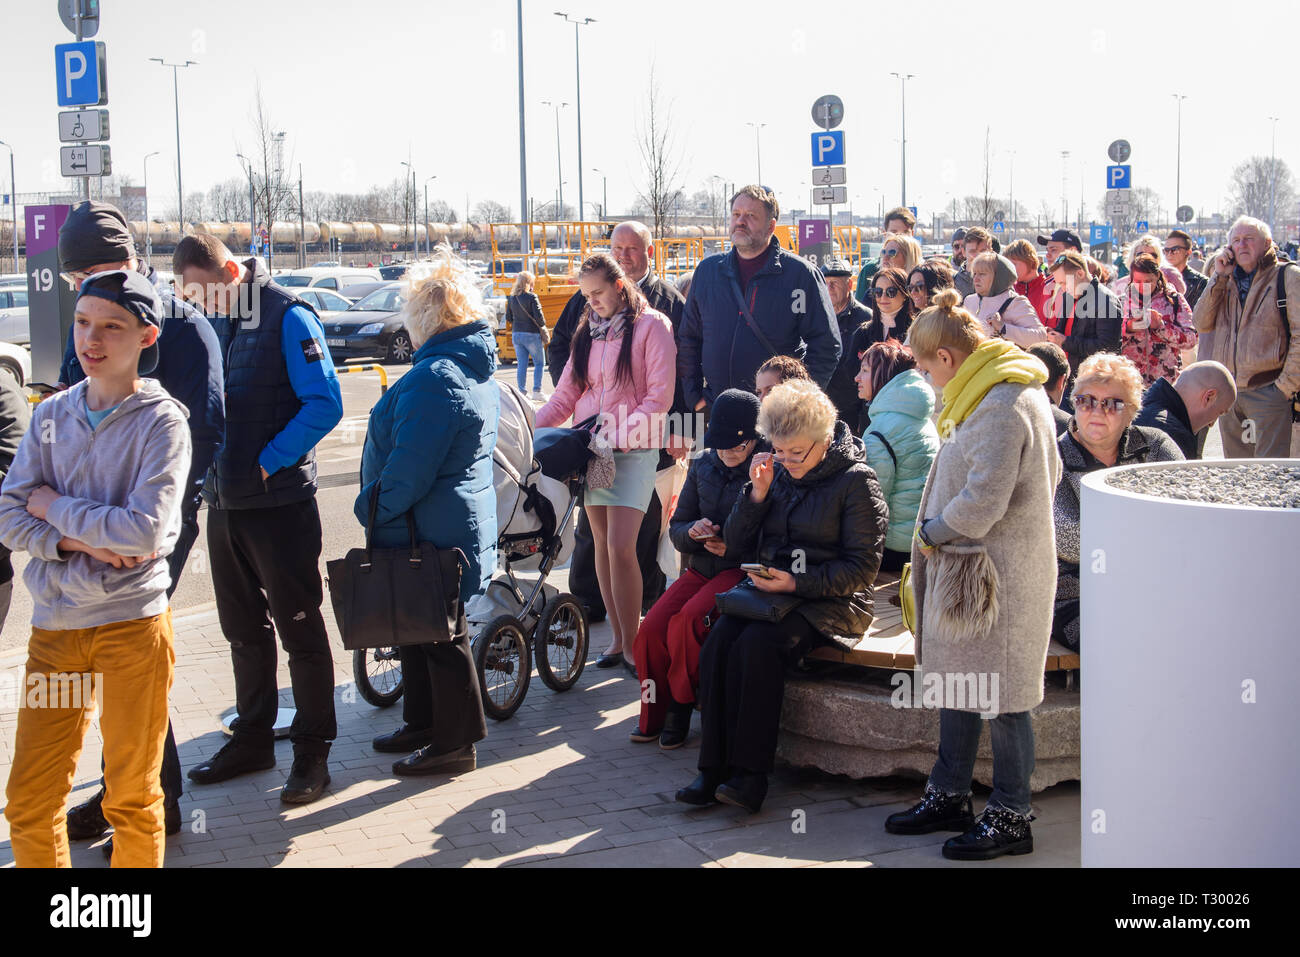 04.04.2019. RIGA, LATVIA. Crowd with people in Akropole shopping centre. Official opening of biggest shopping centre Akropole in Latvia. The shopping  Stock Photo